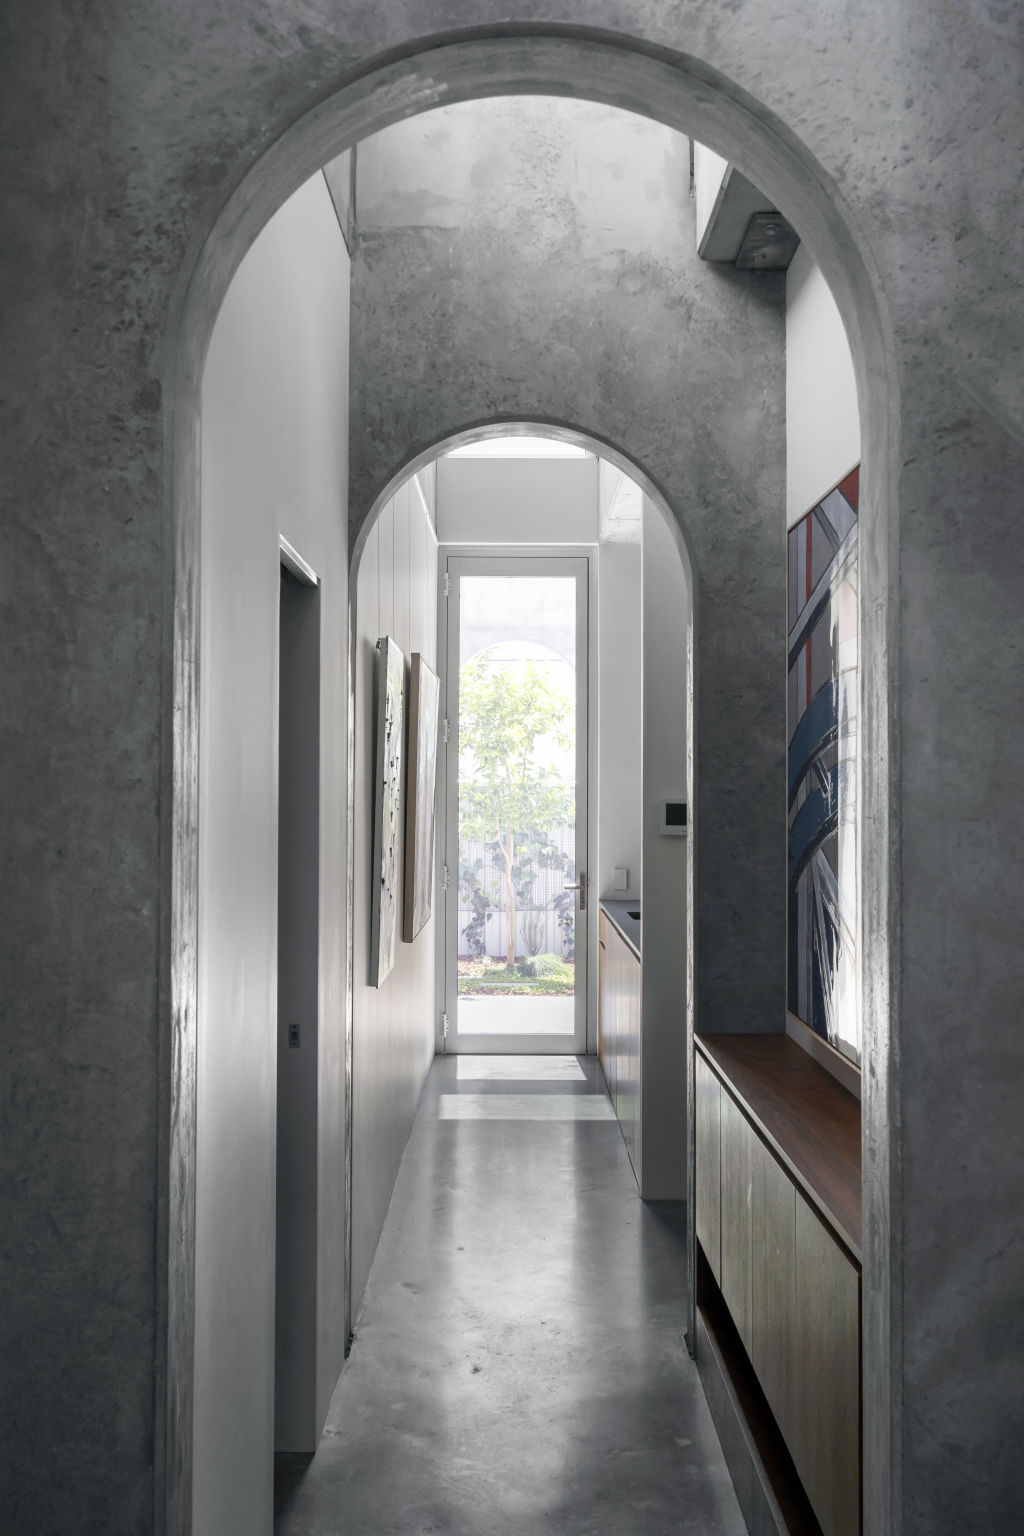 The property has a clean, minimalist design. Photo: Supplied